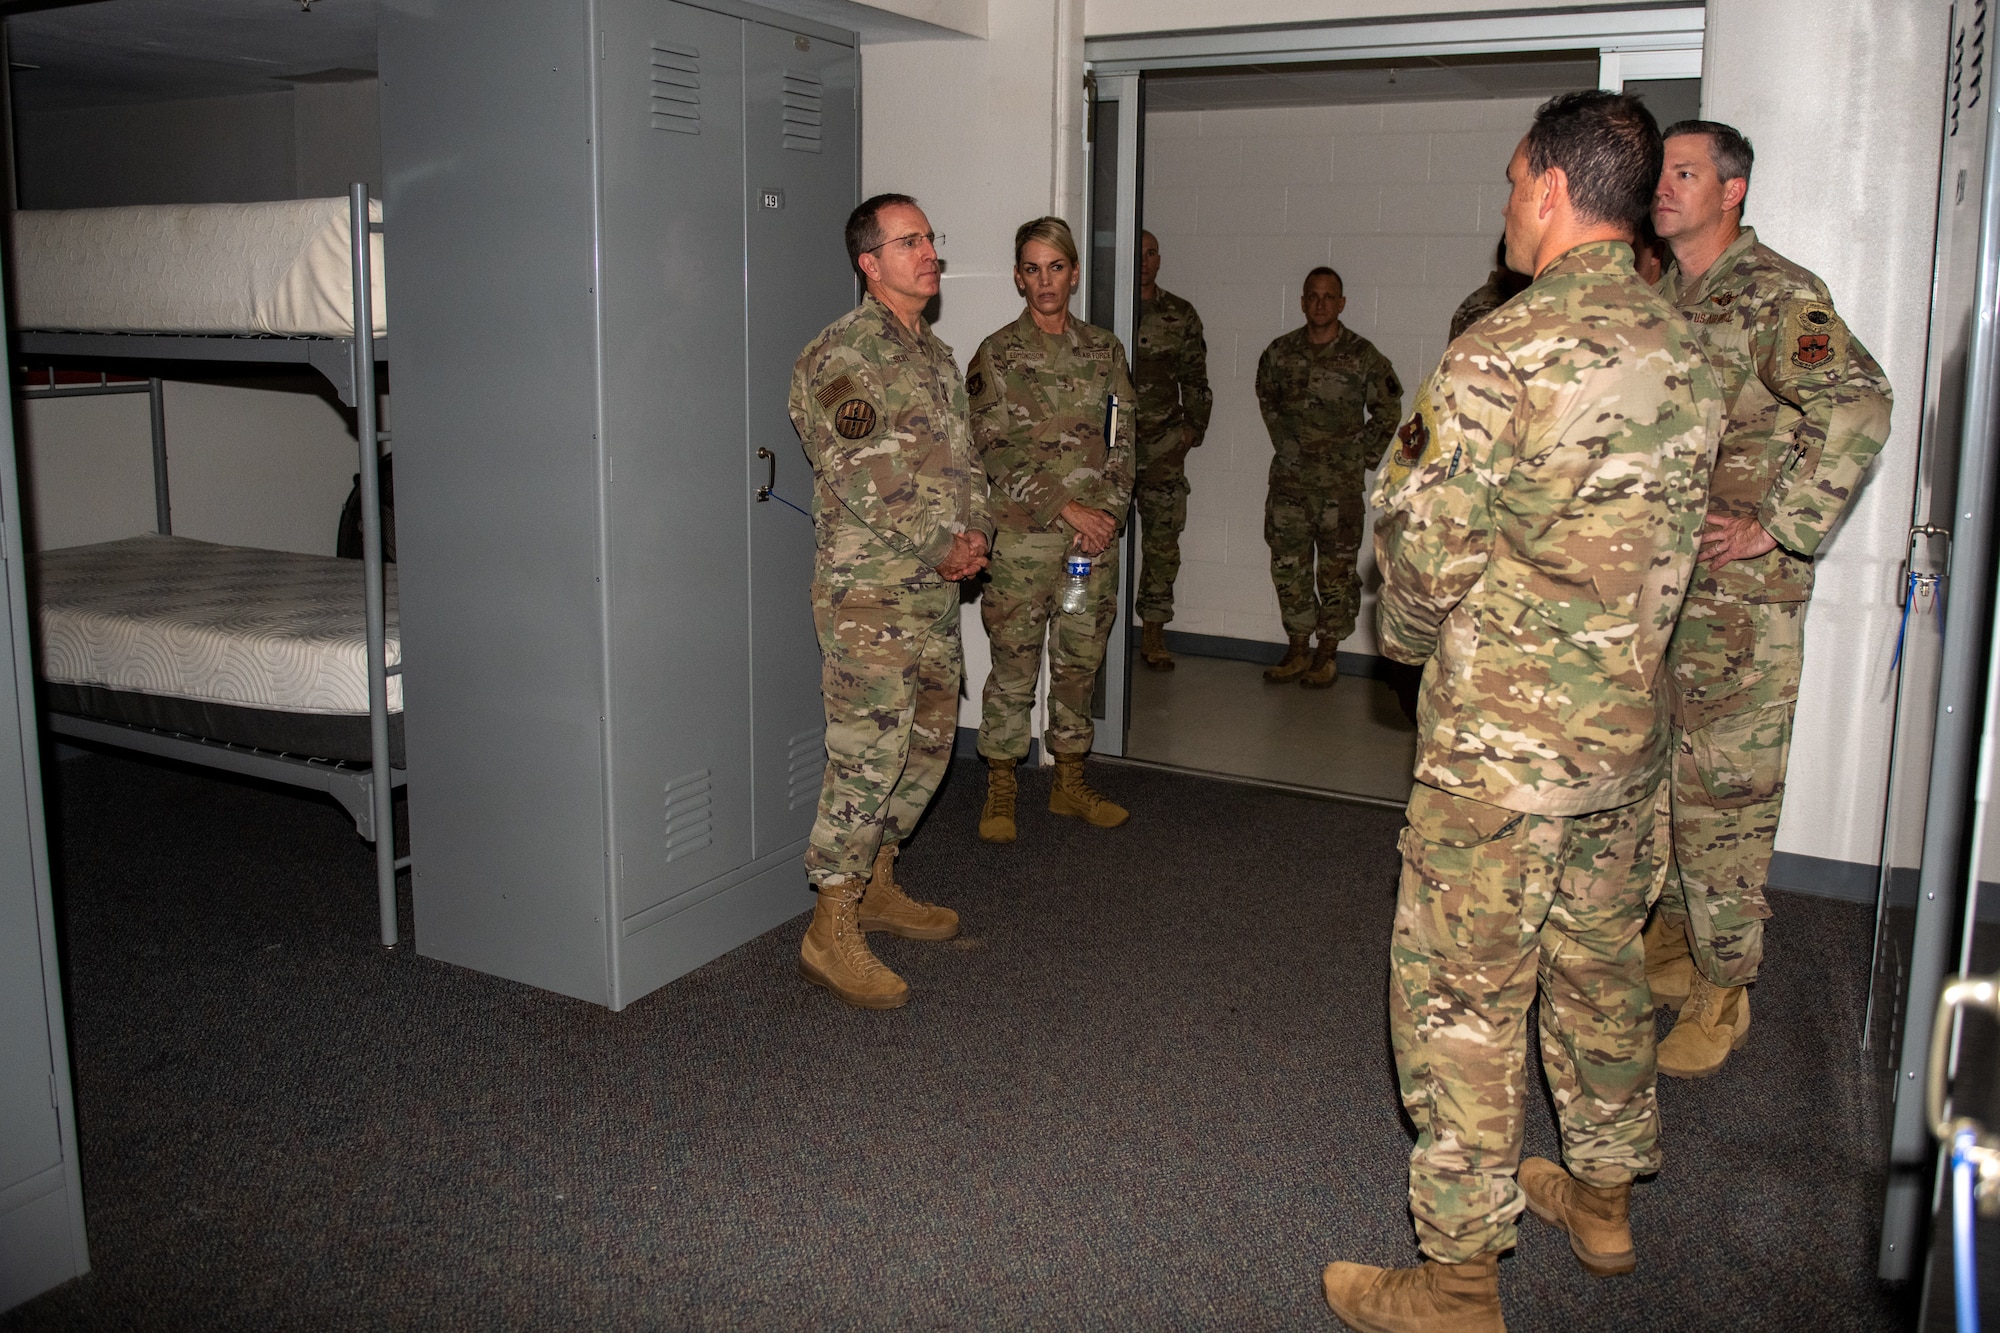 U.S. Air Force Lt. Gen. James “Jim” Slife (near center), Air Force Special Operations Command commander, and Maj. Gen. Michele Edmondson (far center), 2nd Air Force commander, observe open-bay mixed-sex facilities at the Special Warfare Candidate Course where male and female trainees bunk together at Joint Base San Antonio-Lackland, Texas, Aug. 19, 2022. Modified mixed-sex facilities were built at the Special Warfare Training Wing to ensure appropriate levels of privacy for mixed-sex cohorts of trainees and to bolster diversity, inclusion and integration.